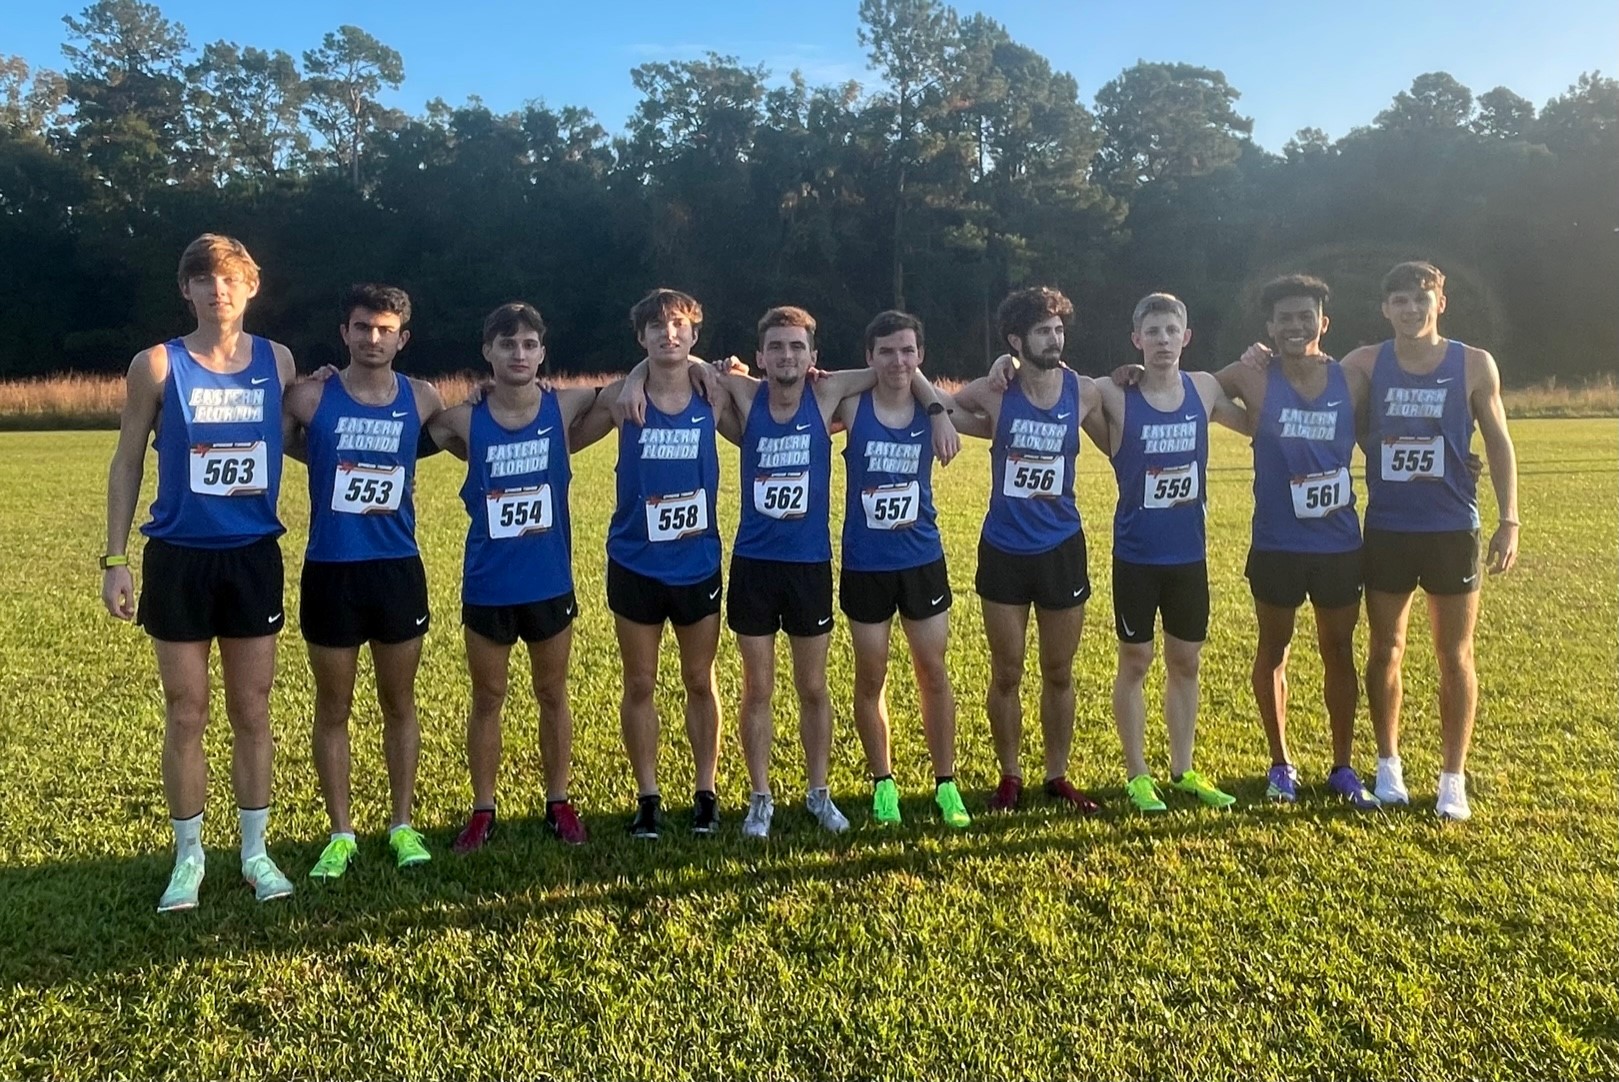 Men's cross country team ready to run at national tournament Saturday